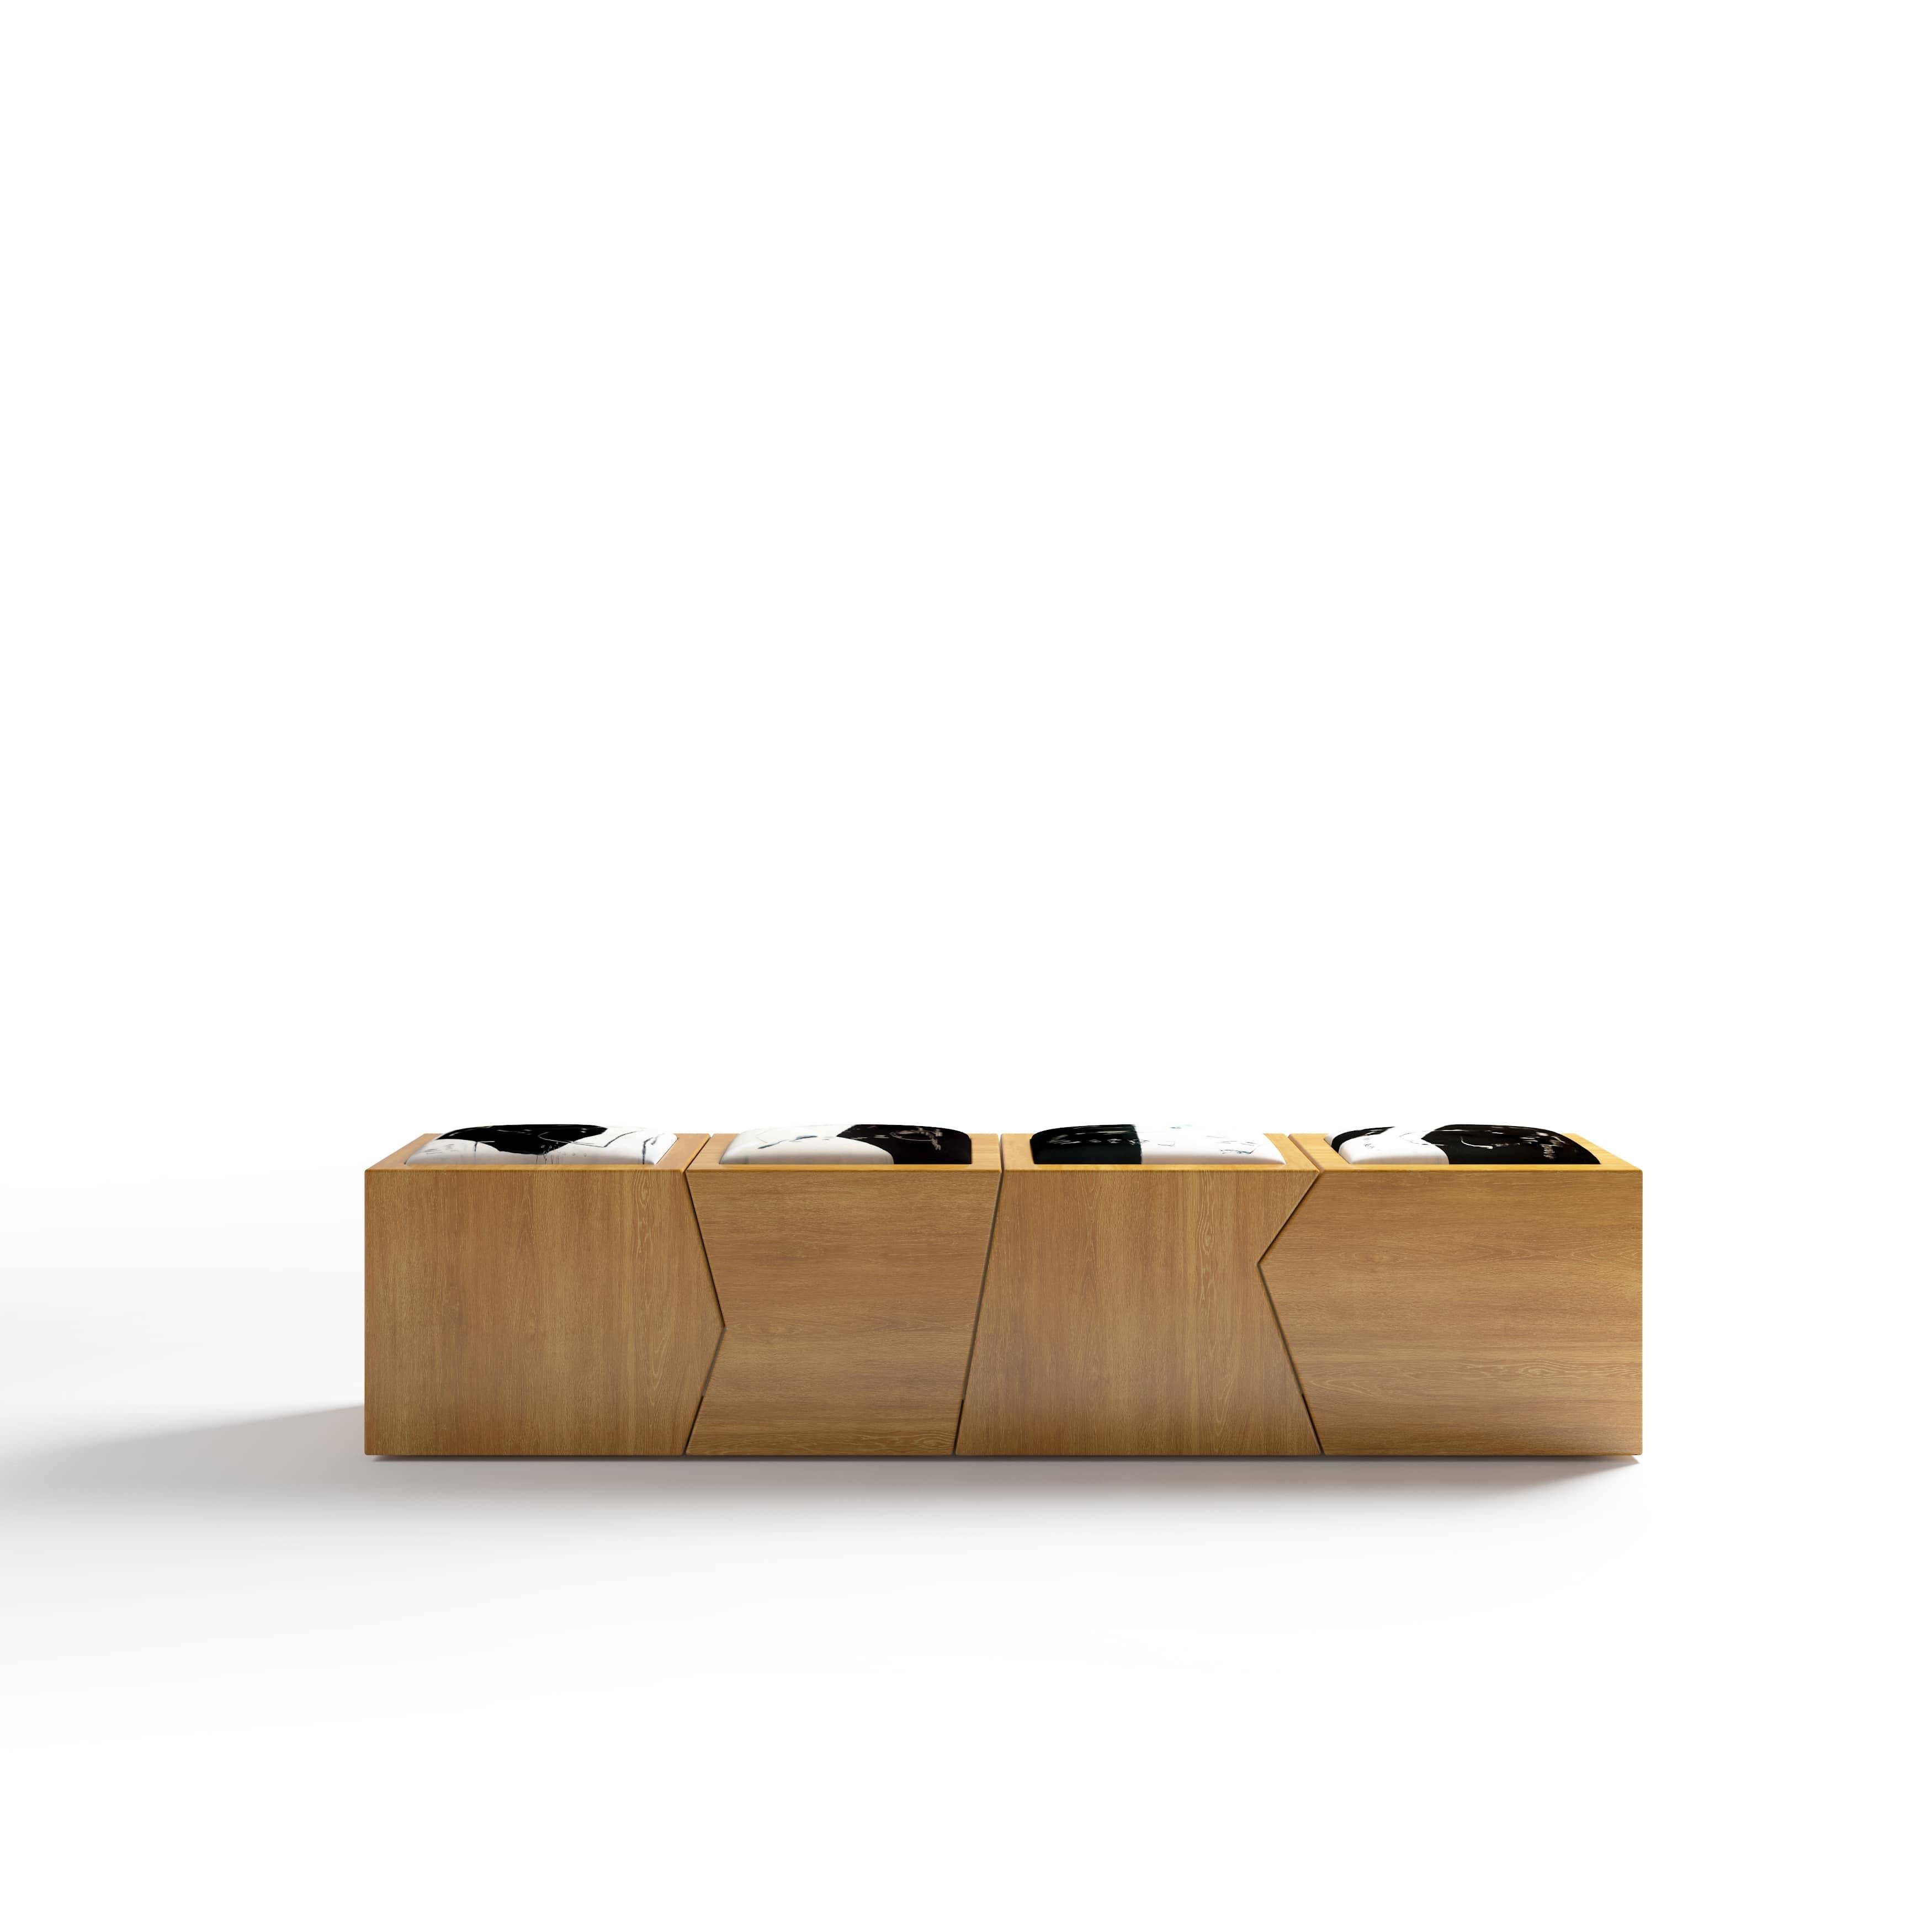 Portuguese 21st Century Tang Bench by Matteo Stucchi and Yuan-Wen Wang For Sale